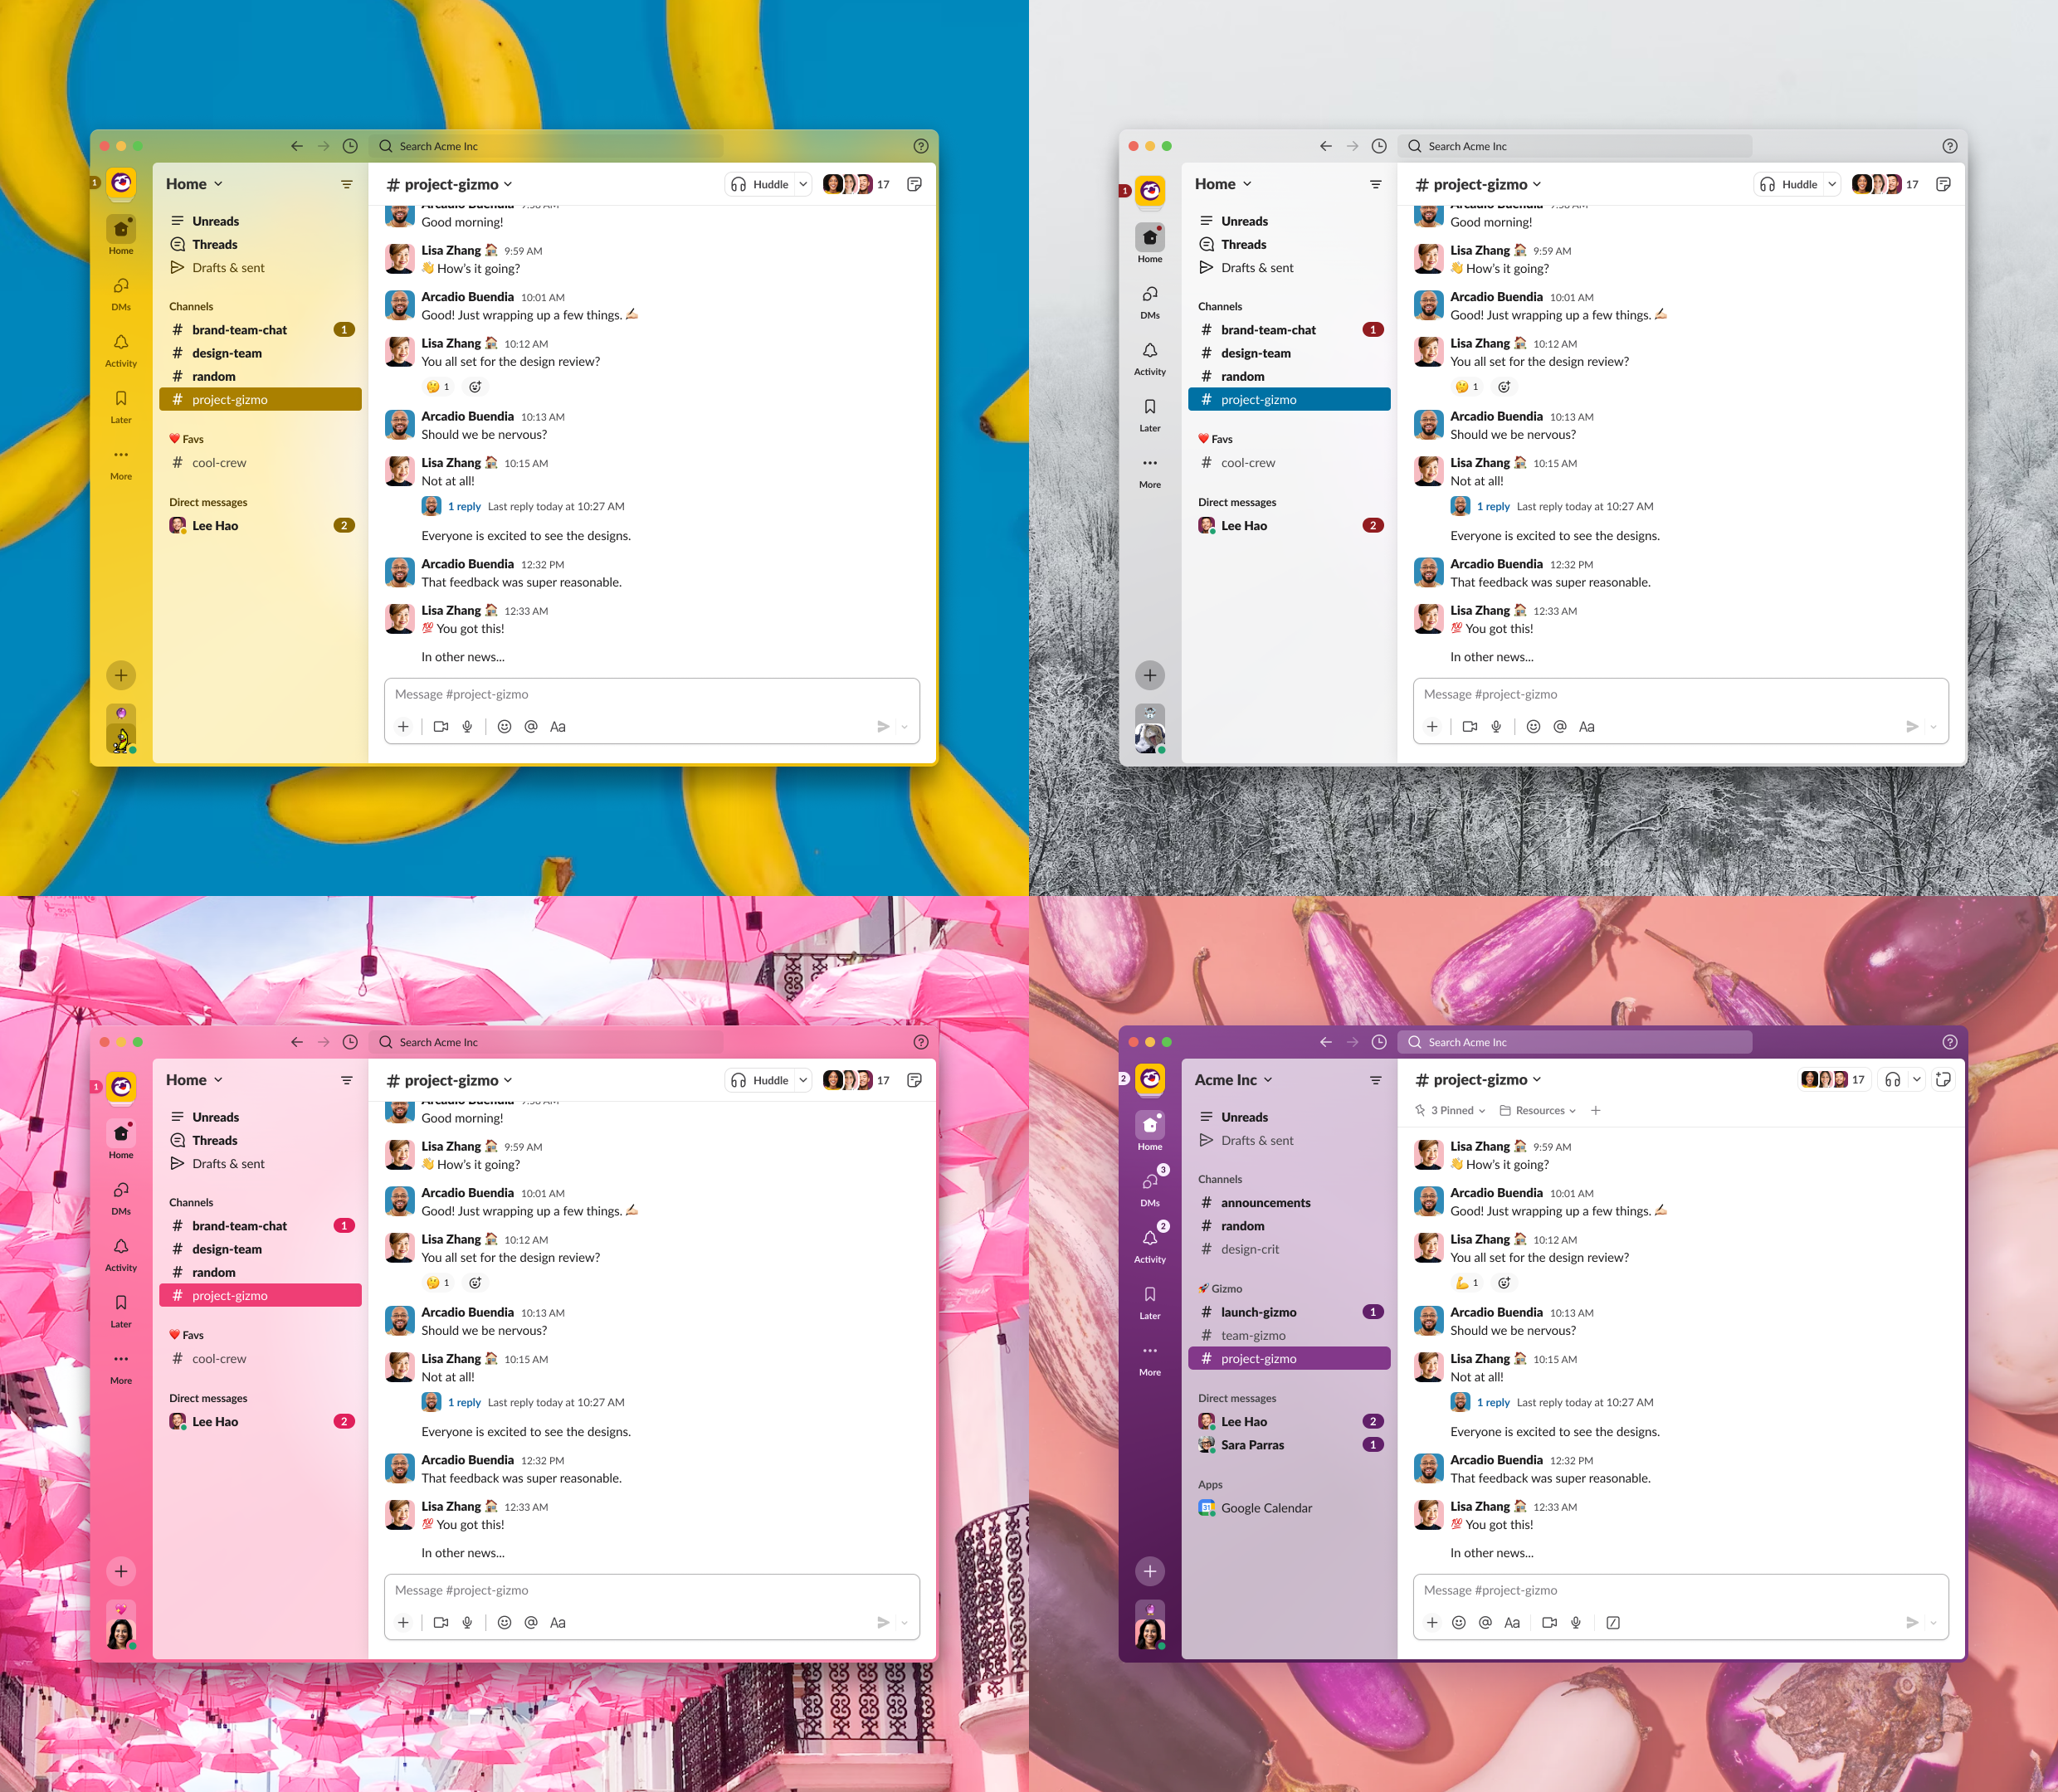 The new Slack design with four different themes applied. Top left features Banana, which showcases a yellow primary color. Top right feature Hoth, which uses a cold gray color. Bottom left is Barbra, which uses a bright pink color. Bottom right is Aubergine, featuring Slack's classic purple color.